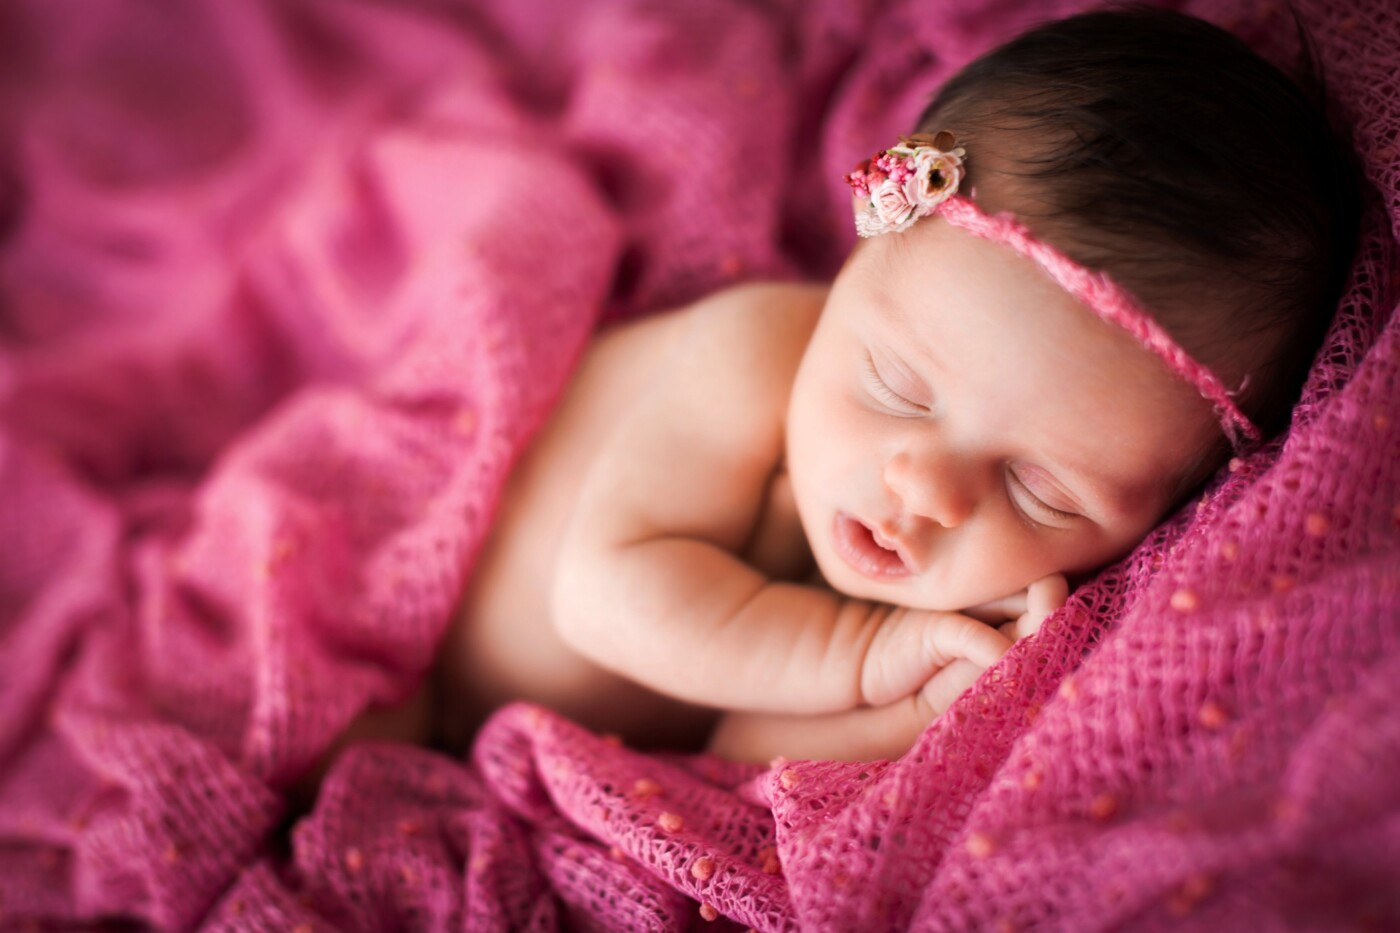 This gorgeous little girl was an absolute gem. We had baby Ariana positioned on the bean bag on a light pink coloured blanket. We decided to drape the bright pink popcorn blanket around her to look as though she was tucked up in bed all snug. One of my favourite images.